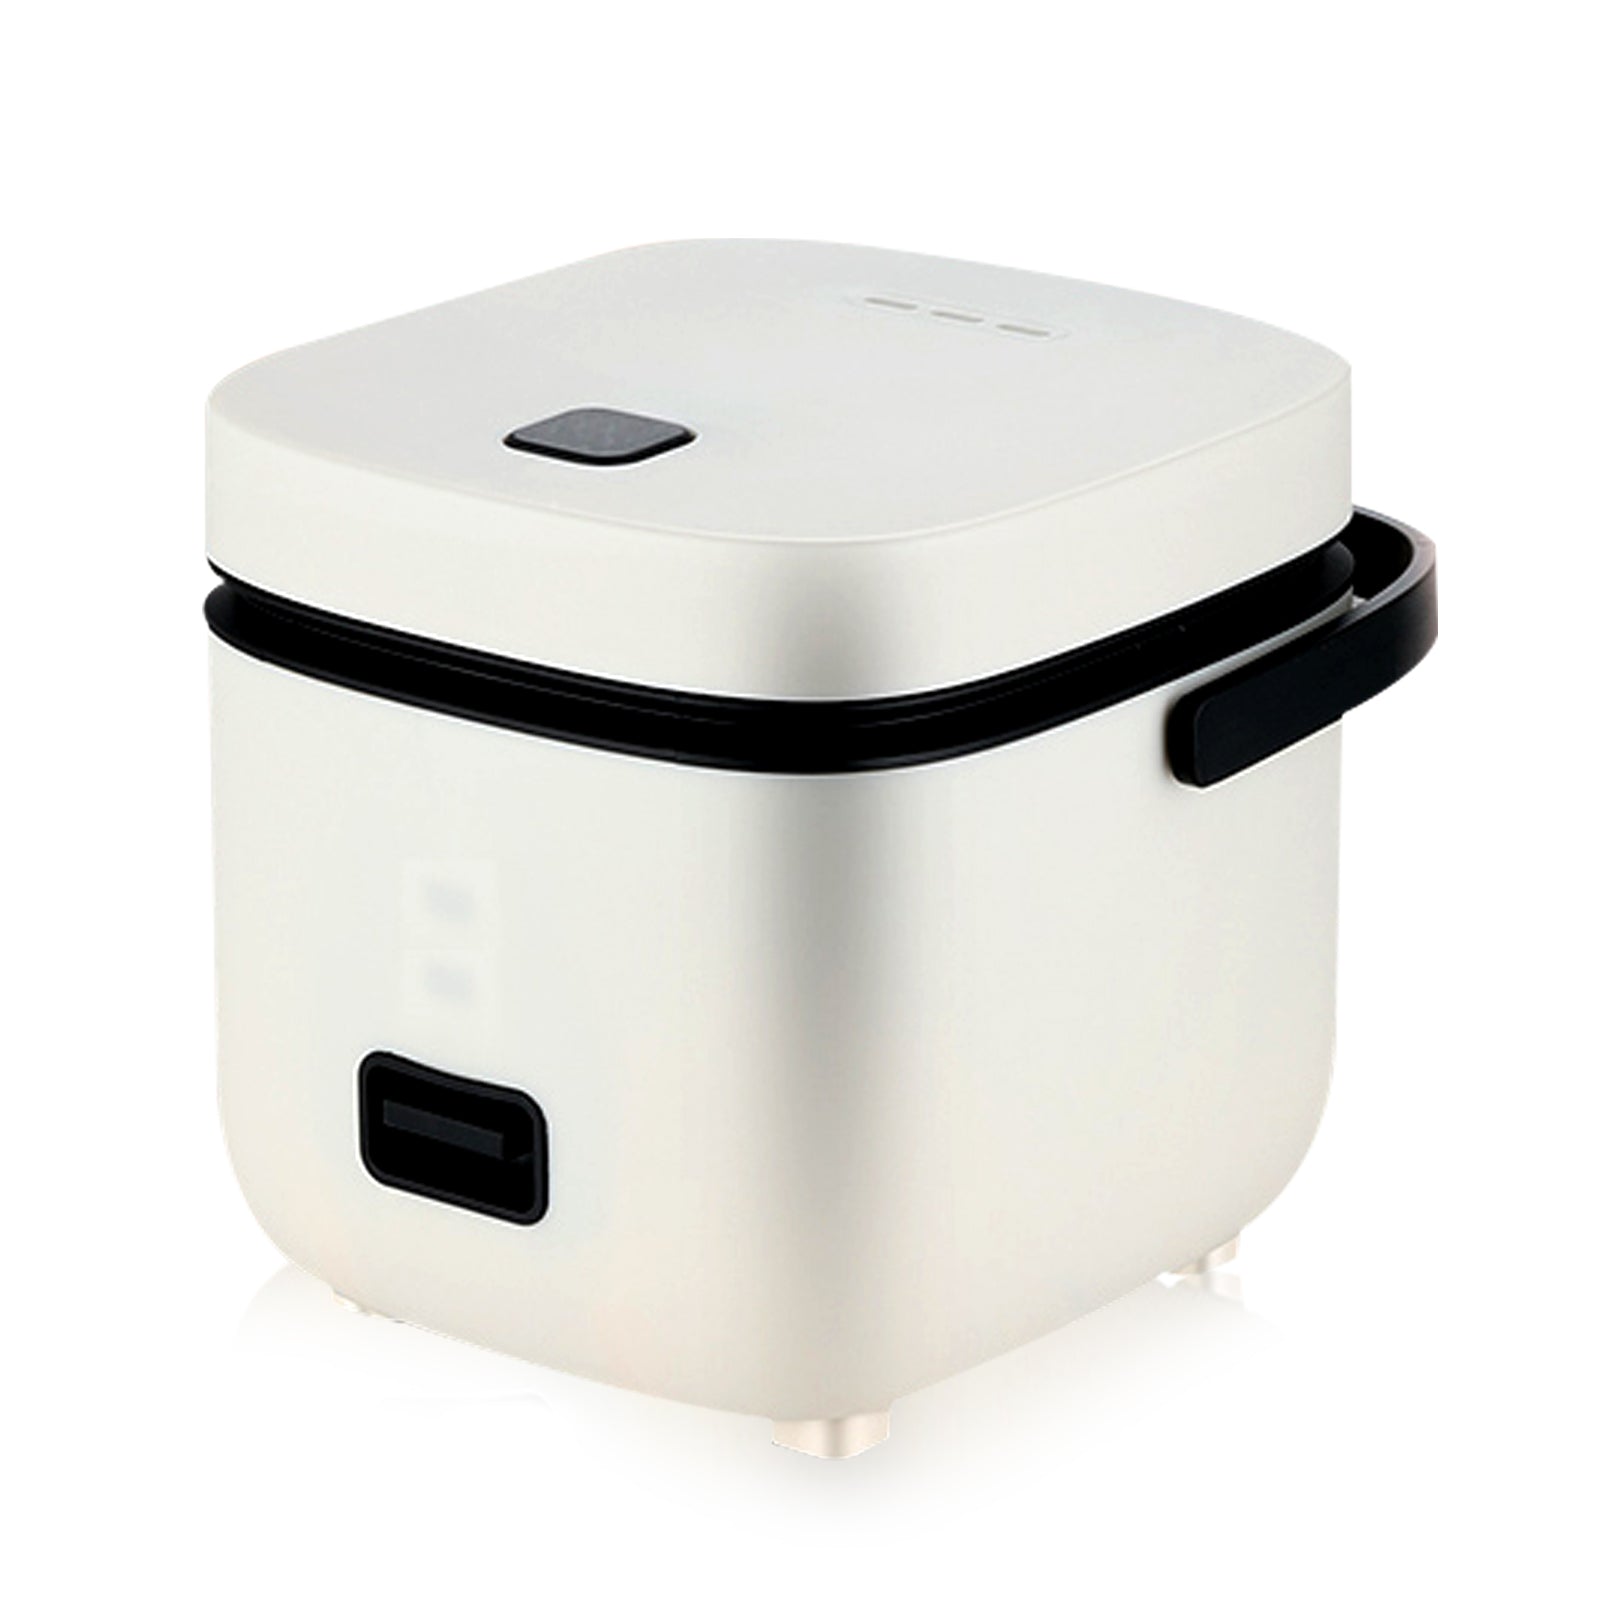 Do You Really Know What You're Eating?: $29.99 rice cooker is